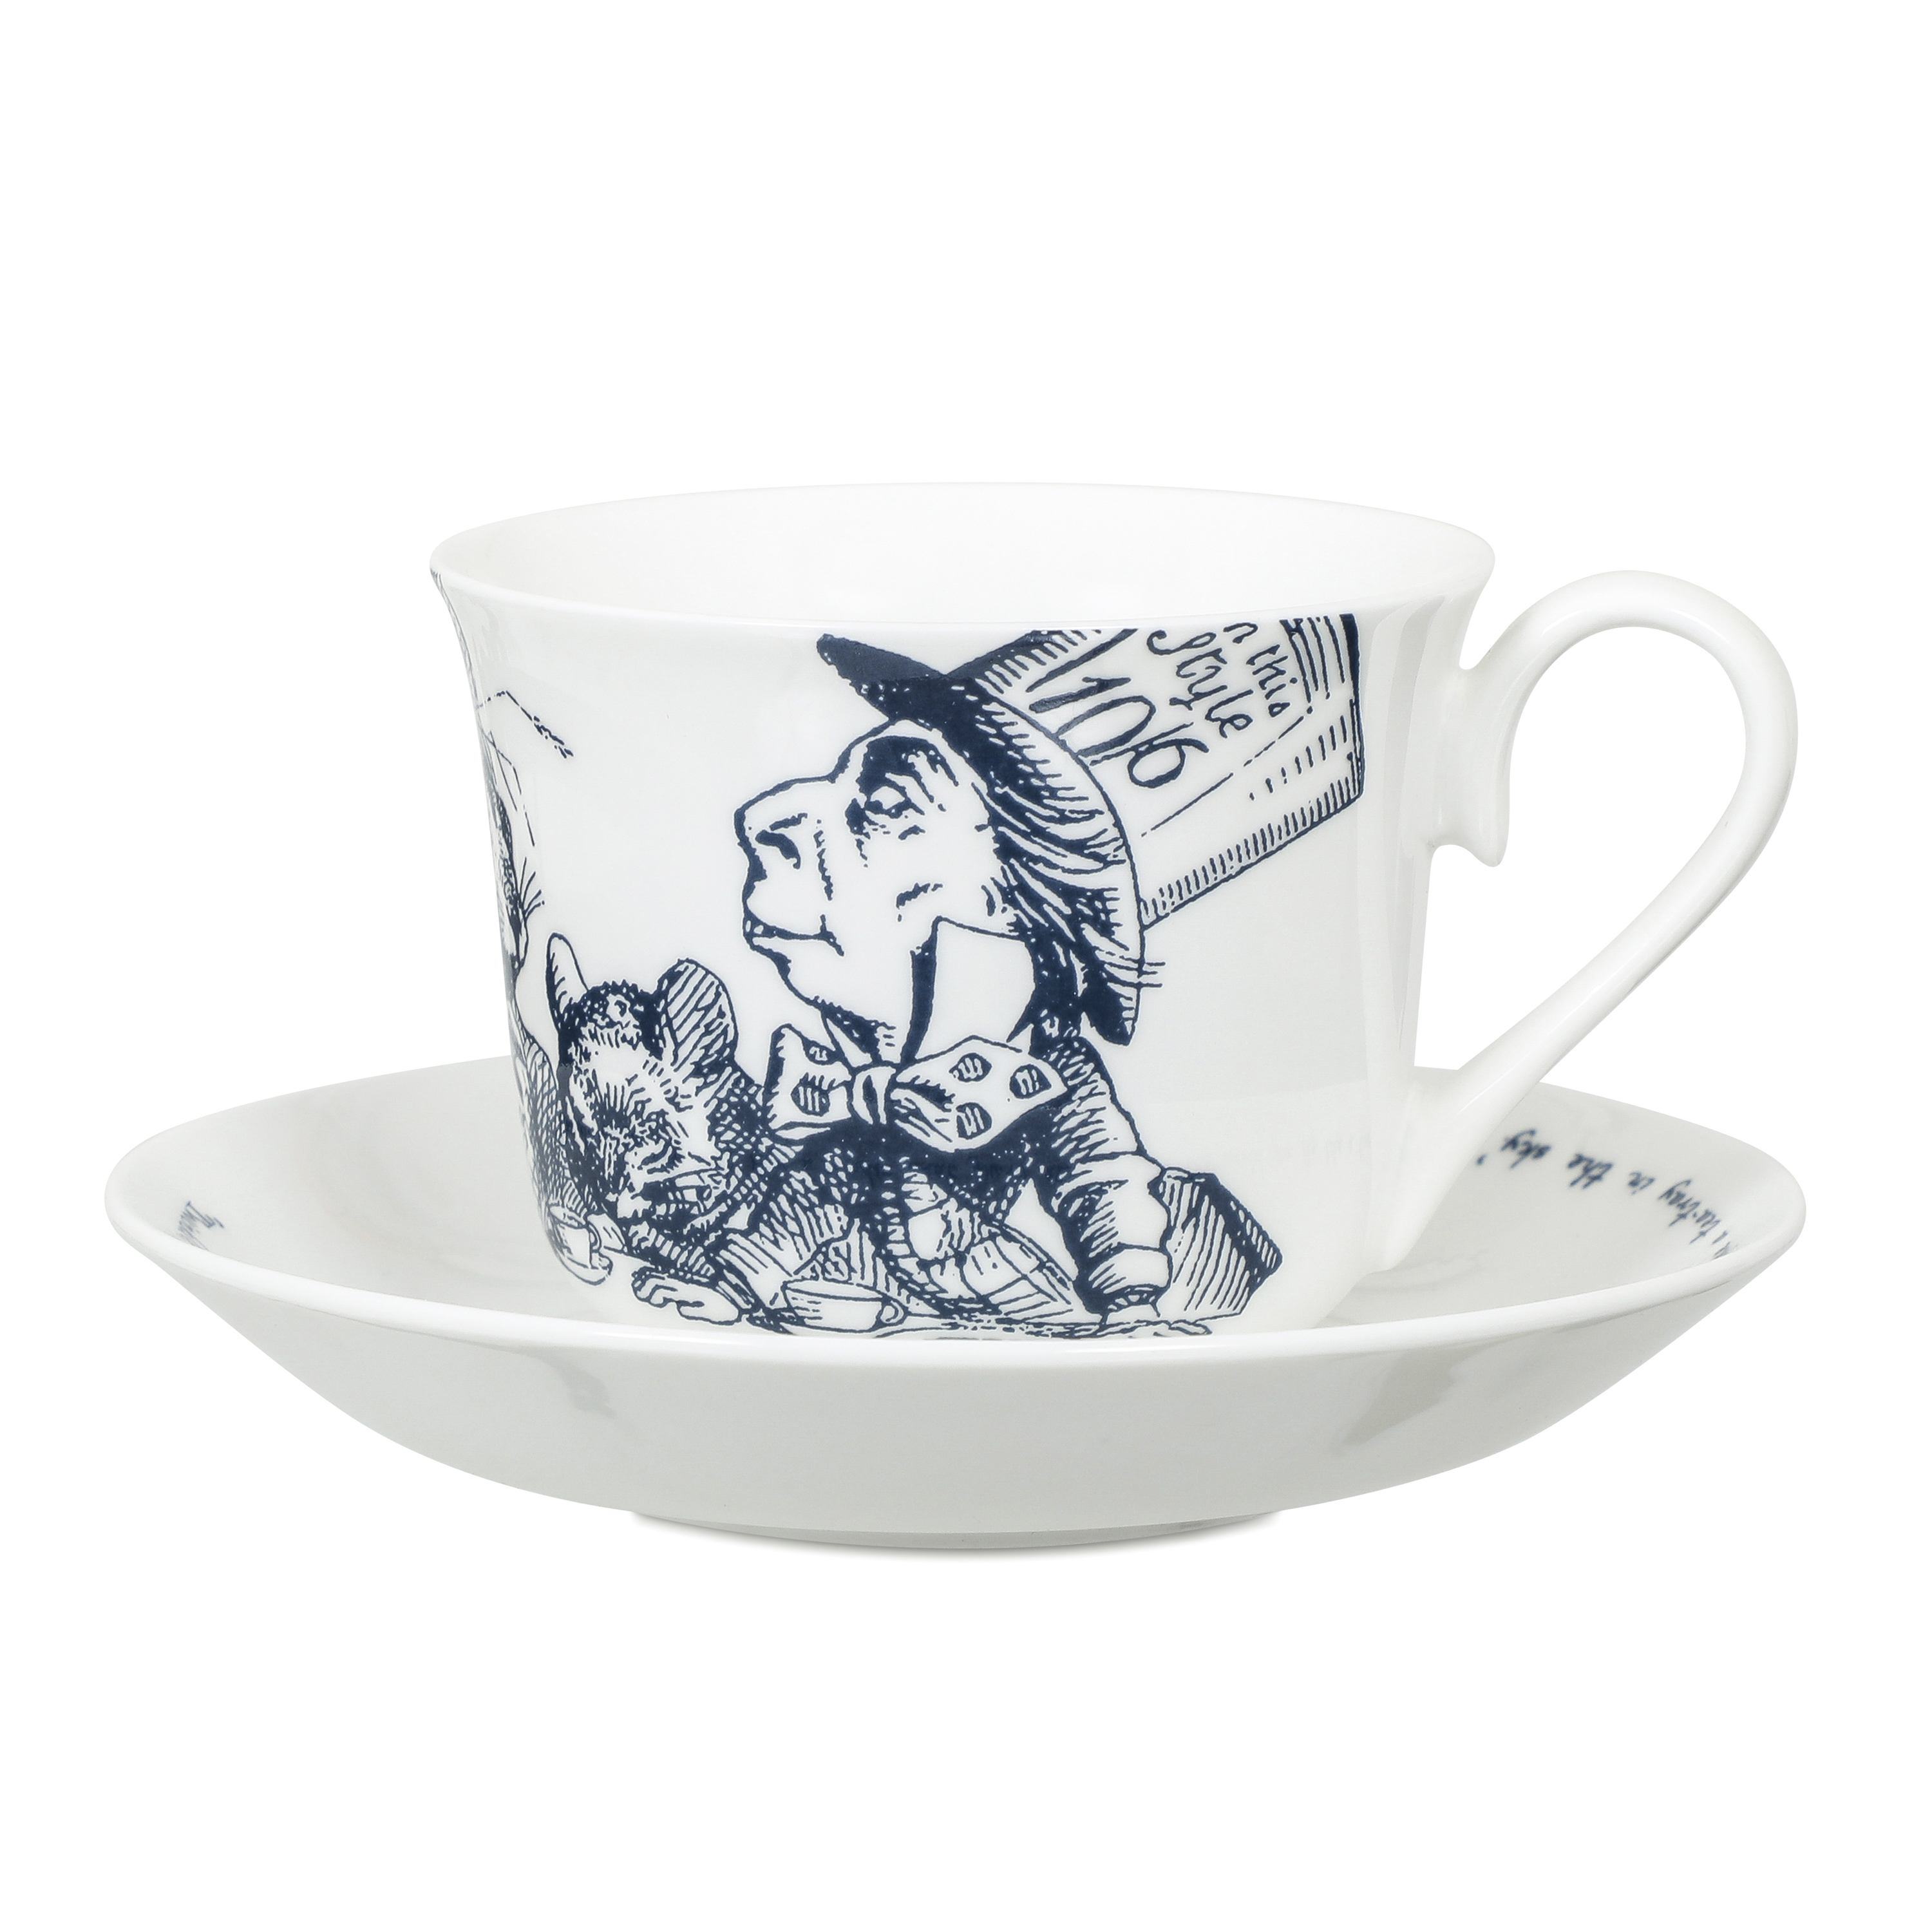 https://www.whittard.com/on/demandware.static/-/Sites-whittard-master-catalog/default/dwe7a038fb/images/hi-res/333765-ALICE_IN_WONDERLAND_TEAPARTY_CUP_AND_SAUCER-1.jpg